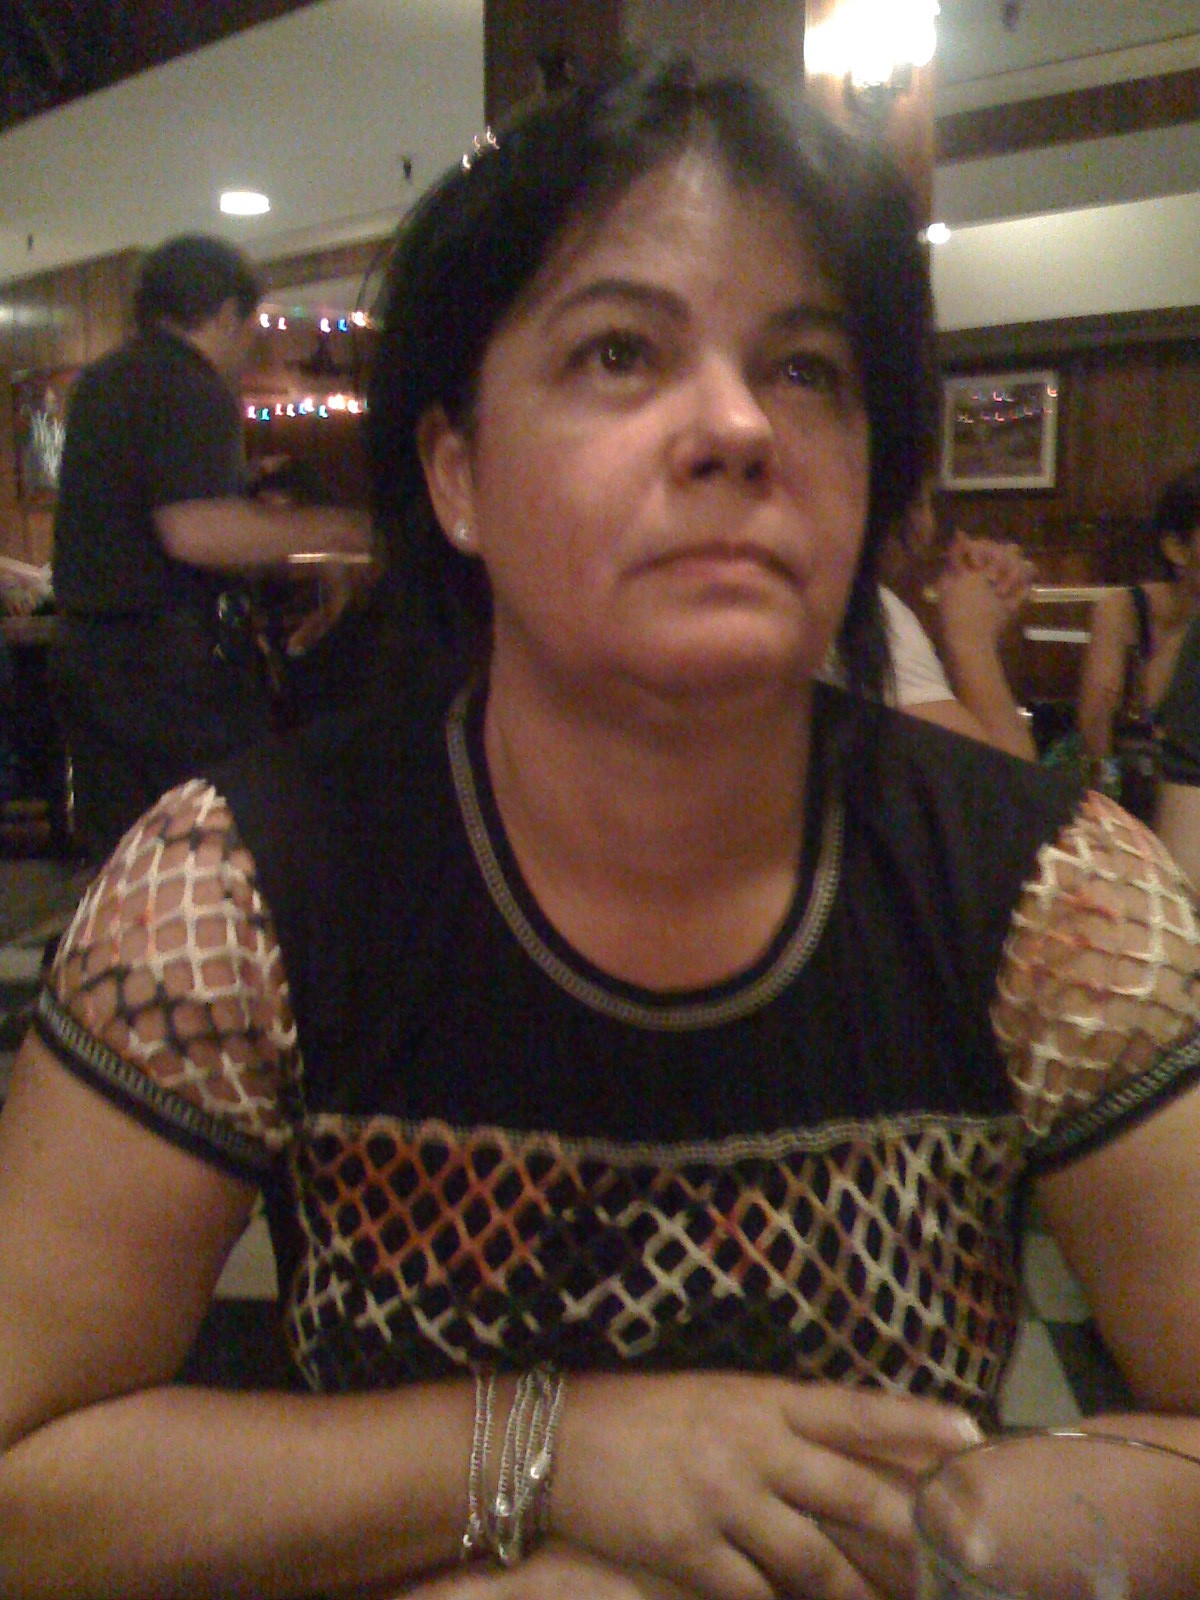 Helenice at Rogerio's Bday August 2008